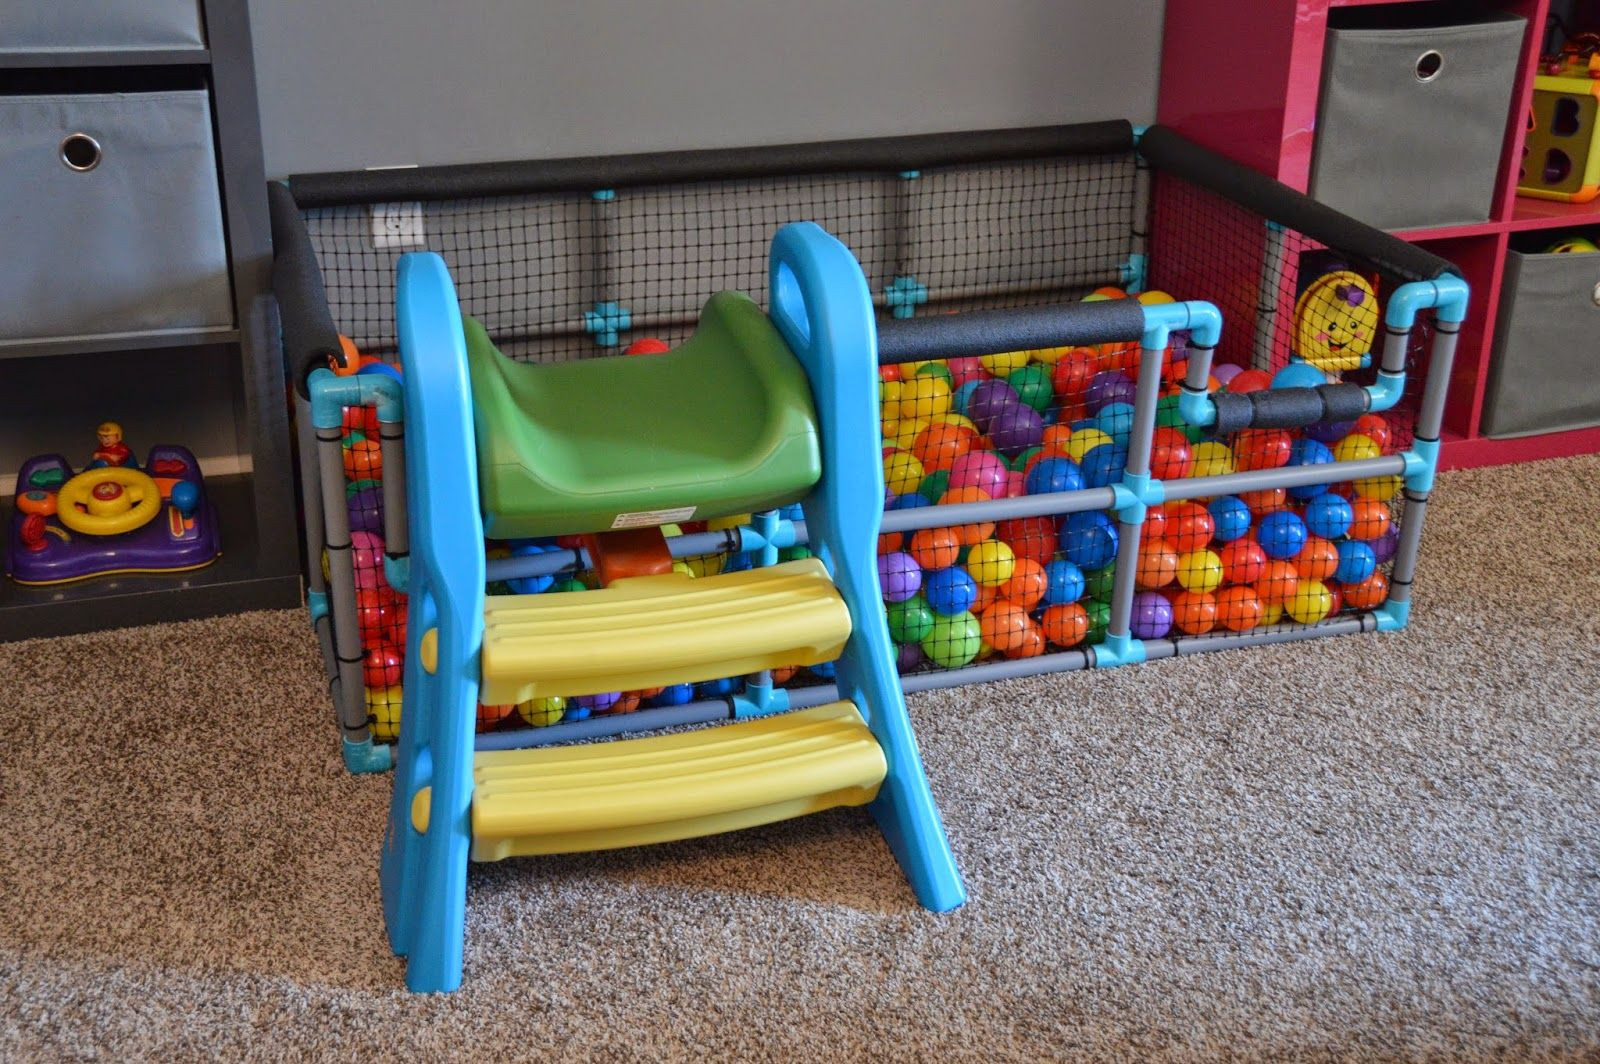 DIY Ball Pit For Toddlers
 Tour of our Home Playroom